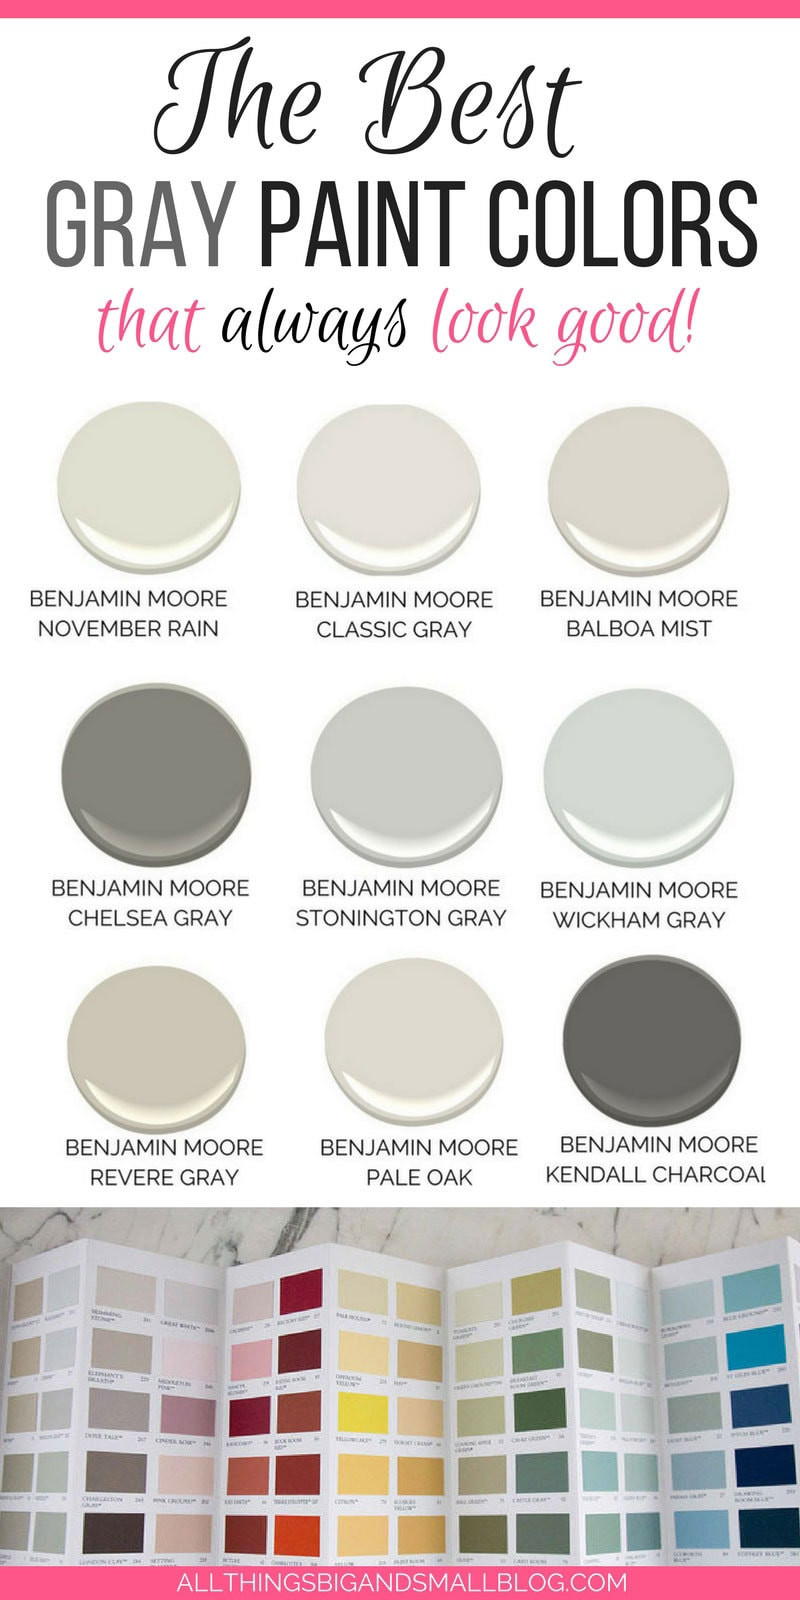 Best ideas about Gray Paint Colors
. Save or Pin The Best Gray Paint Colors NEVER FAIL Gray Paints Now.